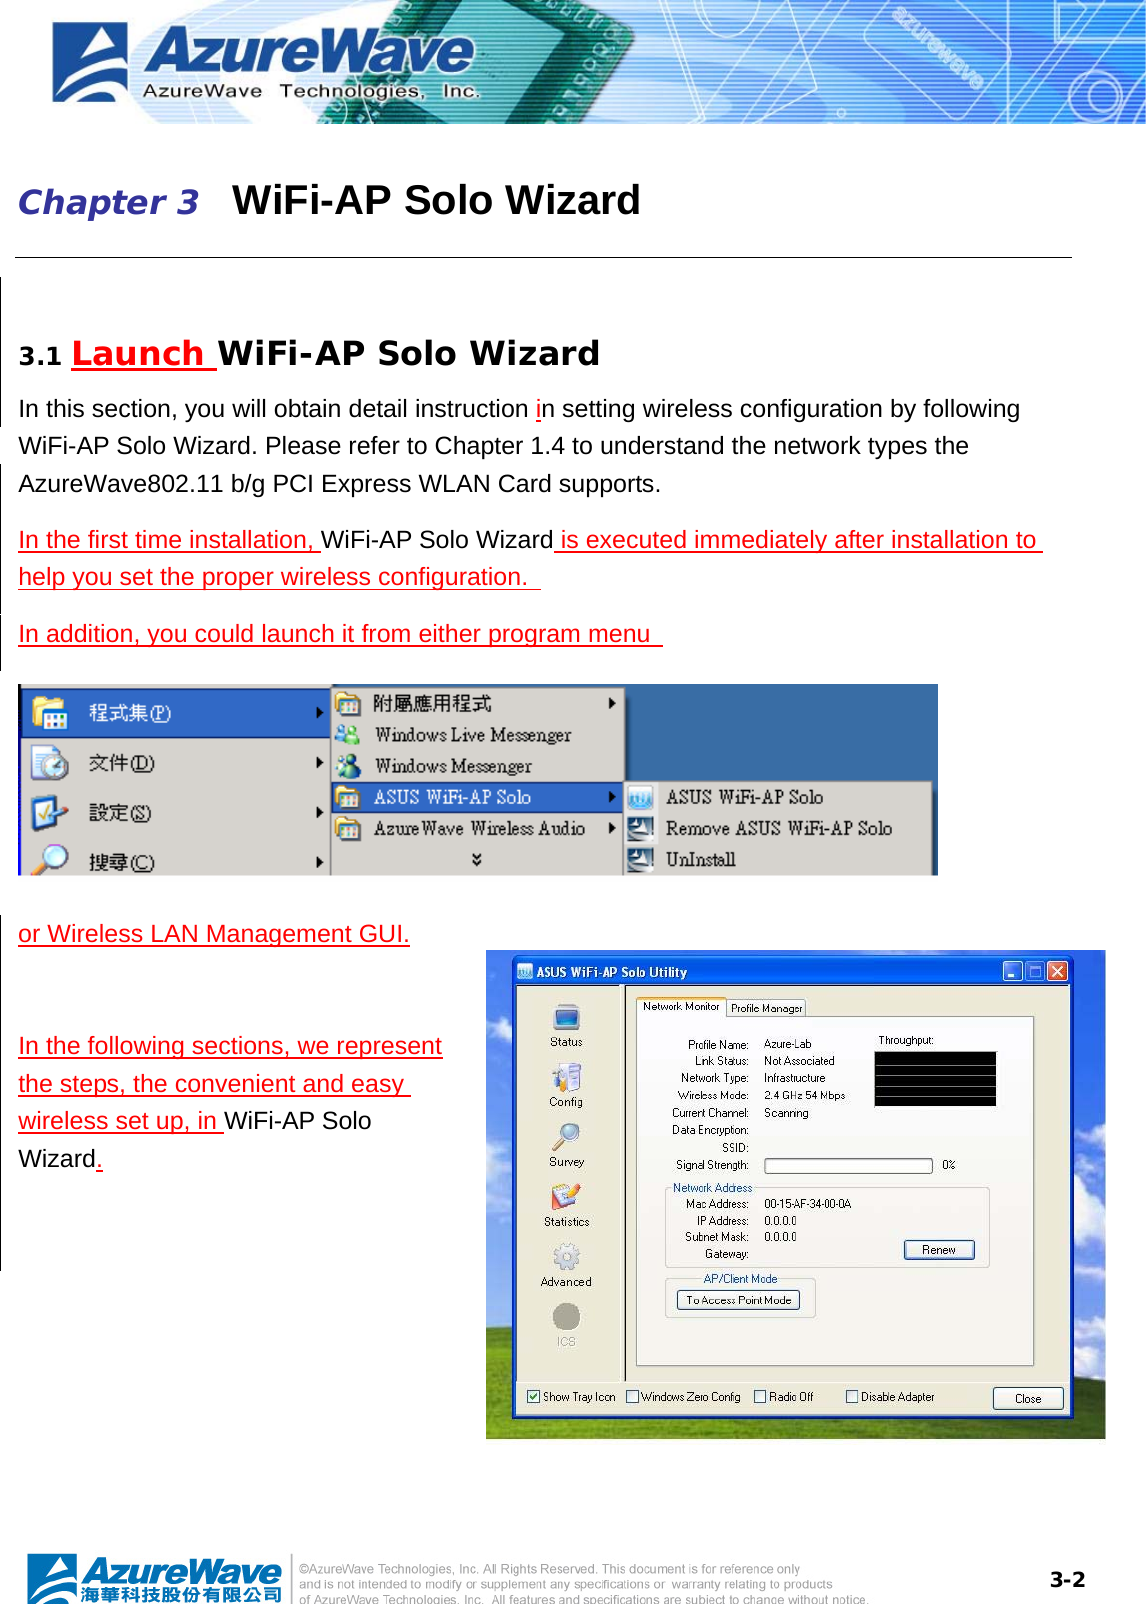  3-2Chapter 3   WiFi-AP Solo Wizard  3.1 Launch WiFi-AP Solo Wizard In this section, you will obtain detail instruction in setting wireless configuration by following WiFi-AP Solo Wizard. Please refer to Chapter 1.4 to understand the network types the   AzureWave802.11 b/g PCI Express WLAN Card supports. In the first time installation, WiFi-AP Solo Wizard is executed immediately after installation to help you set the proper wireless configuration.   In addition, you could launch it from either program menu    or Wireless LAN Management GUI.  In the following sections, we represent the steps, the convenient and easy wireless set up, in WiFi-AP Solo Wizard. 